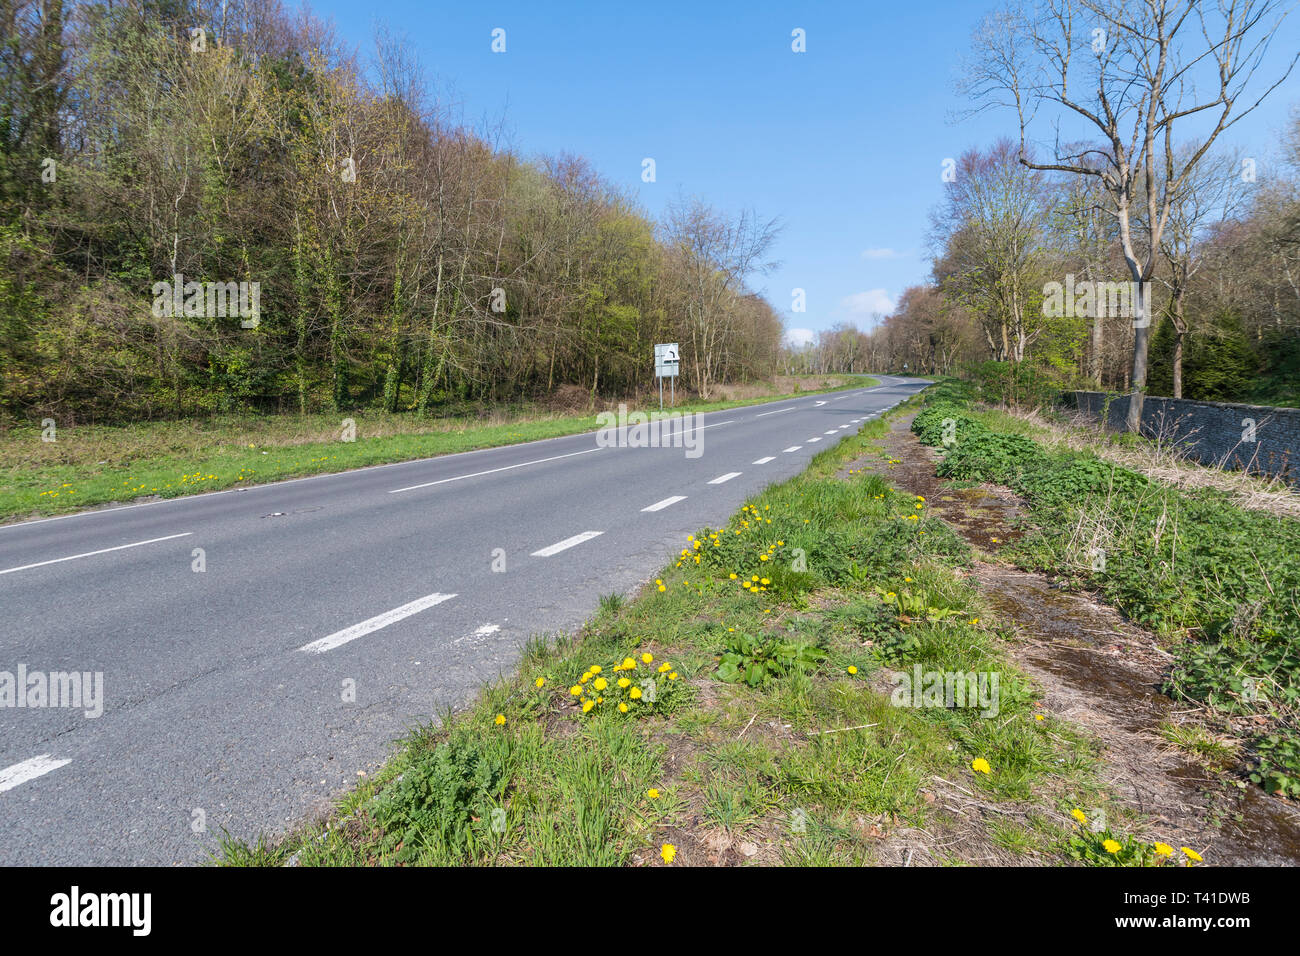 View of the A284 main road through the countryside with no cars, in West Sussex, England, UK. British road without cars. Stock Photo